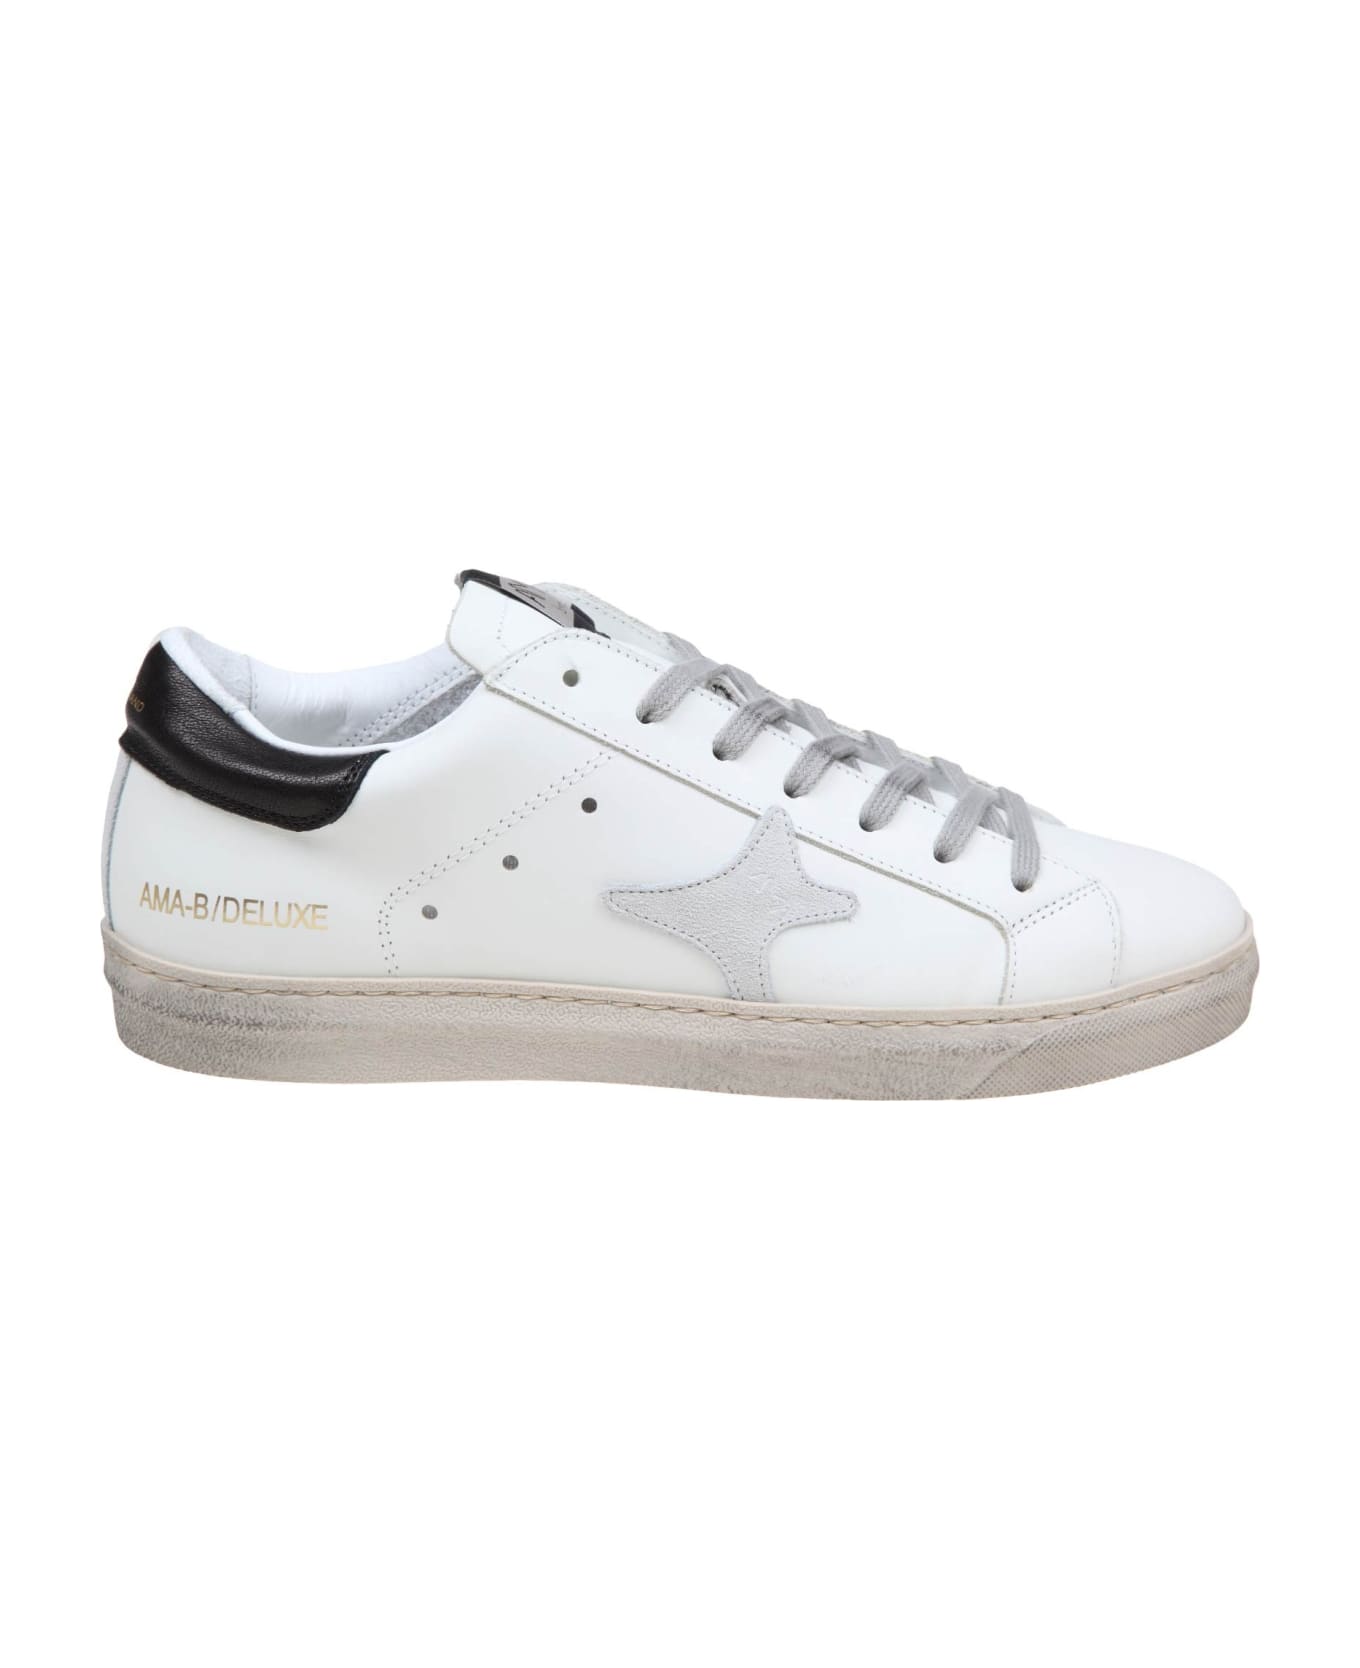 AMA-BRAND Black And White Leather Sneakers - white/black スニーカー